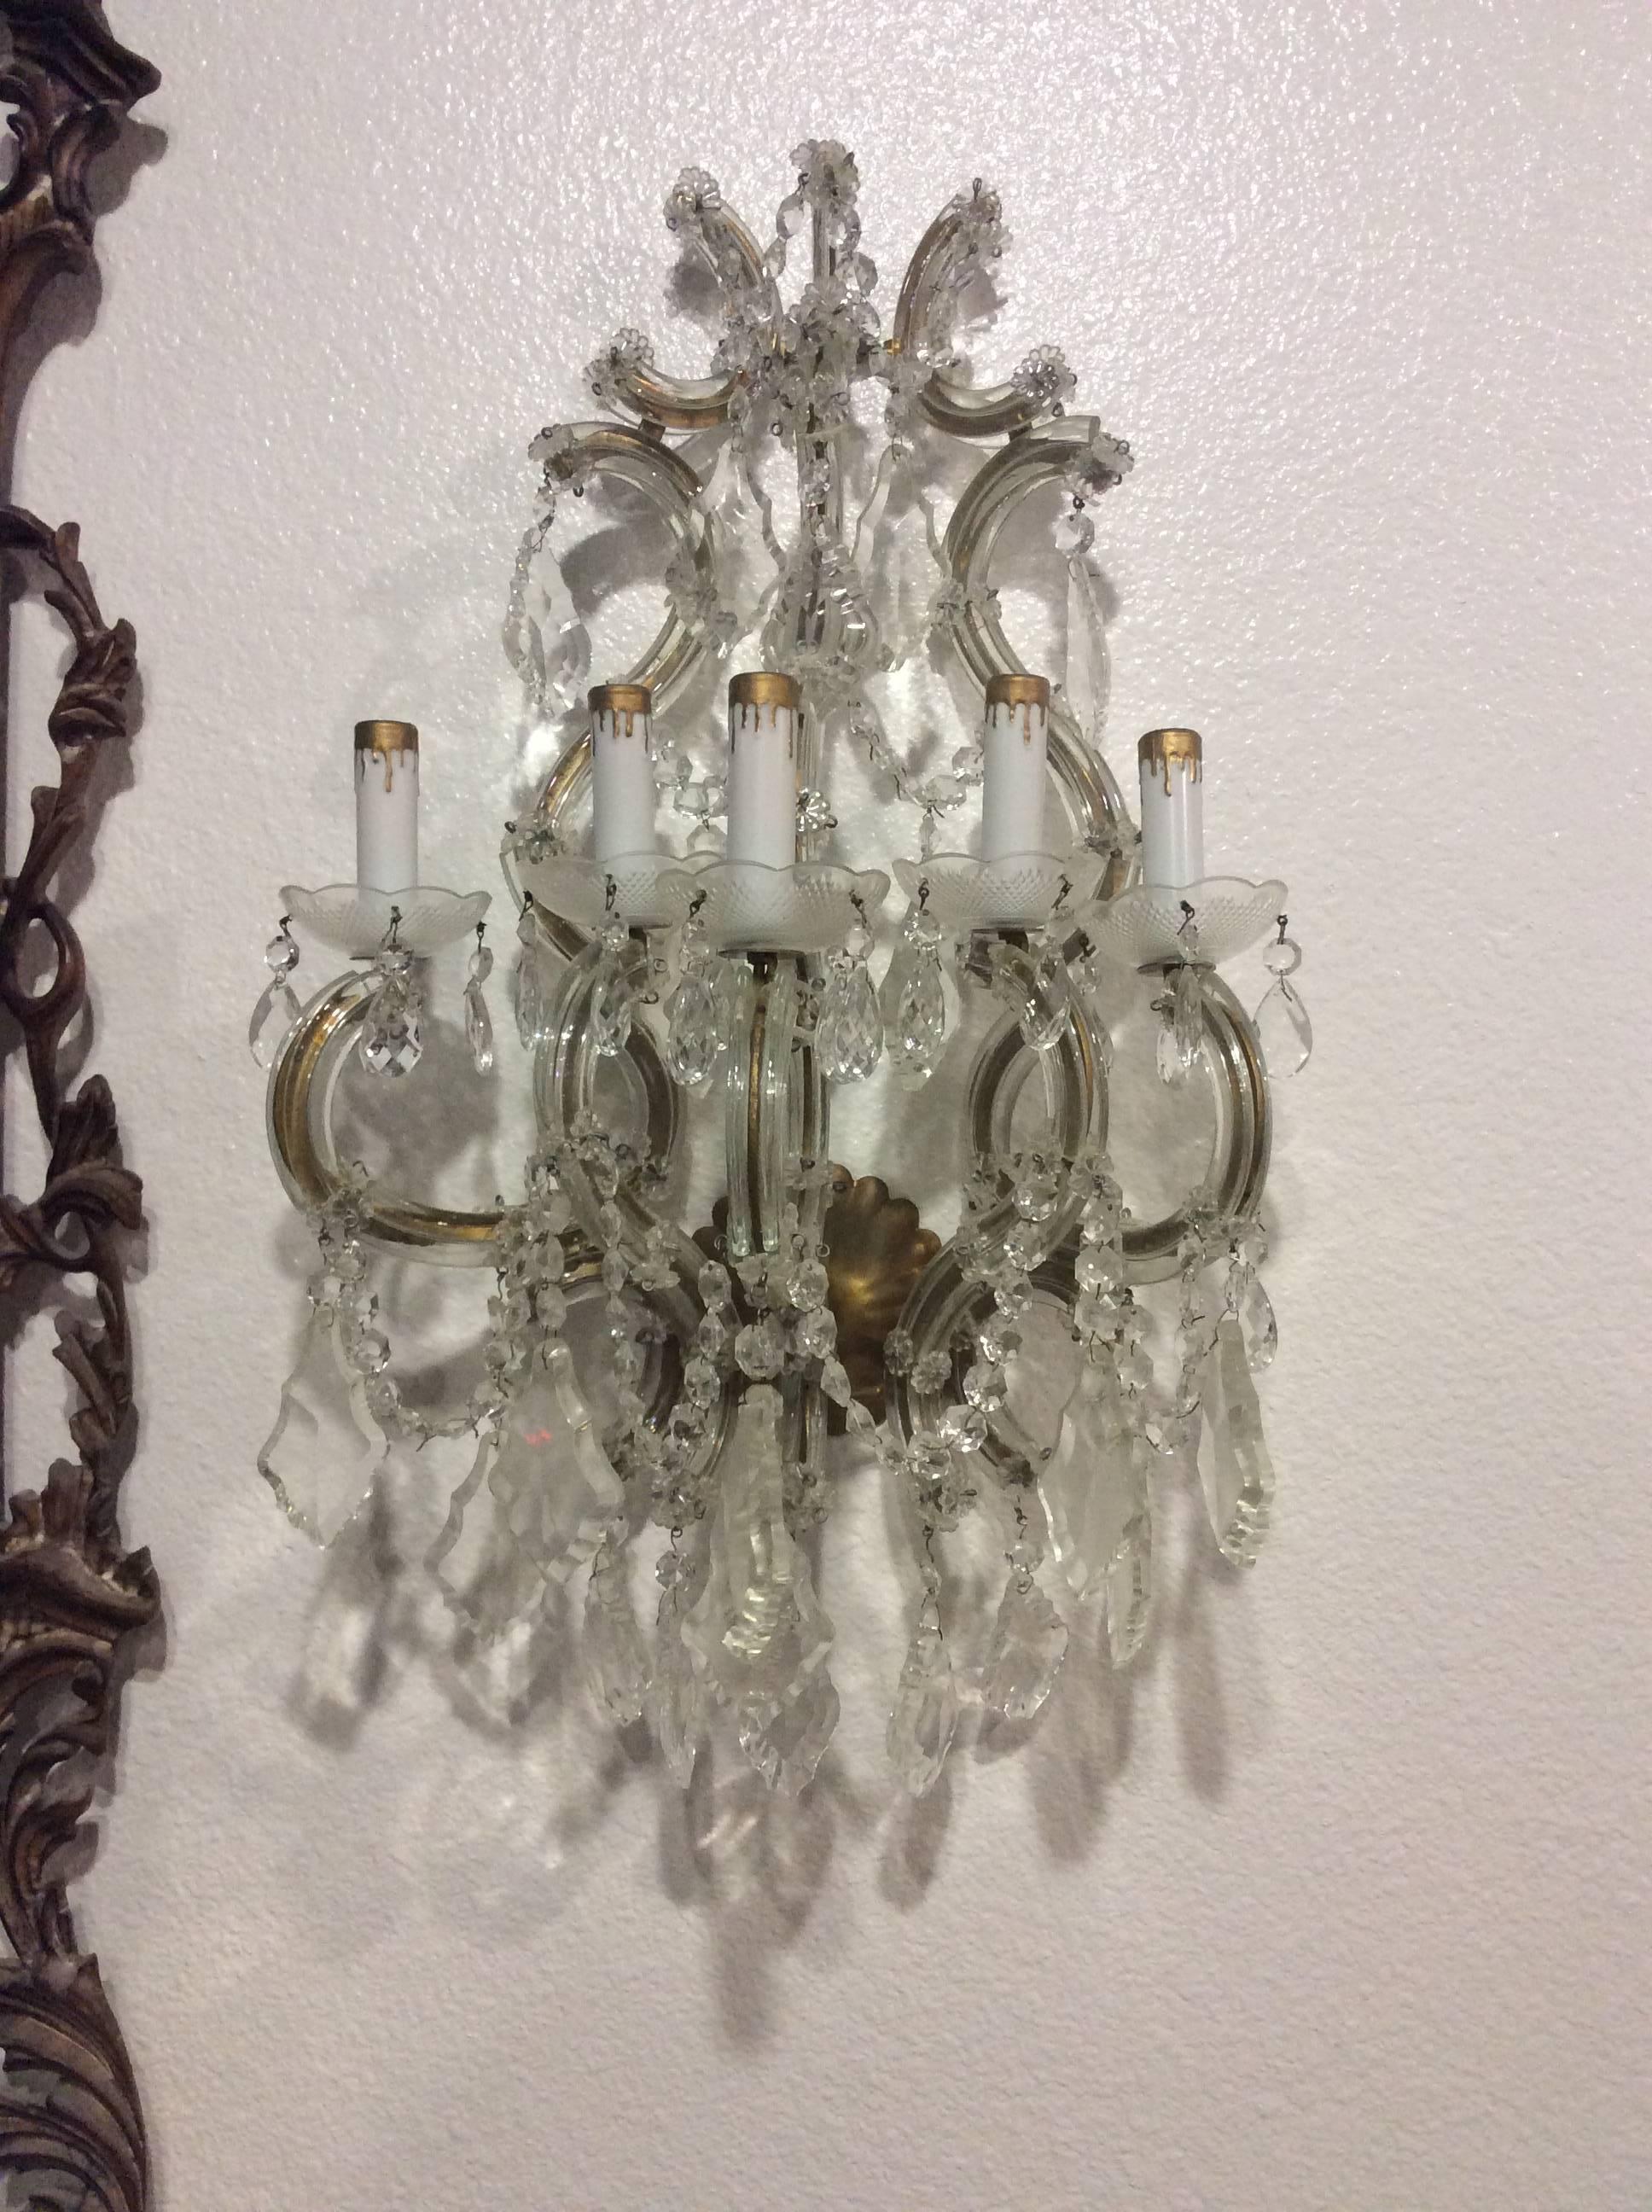 Exquisite Vintage pair of five-light arm sconces. French crystal large pendants, beaded chain, glass bobeche arm cups, crystals, Venetian glass arms and flowers.
Venetian Italian glass flowers, French crystals, gold gilt. Lovely Hollywood Regency,